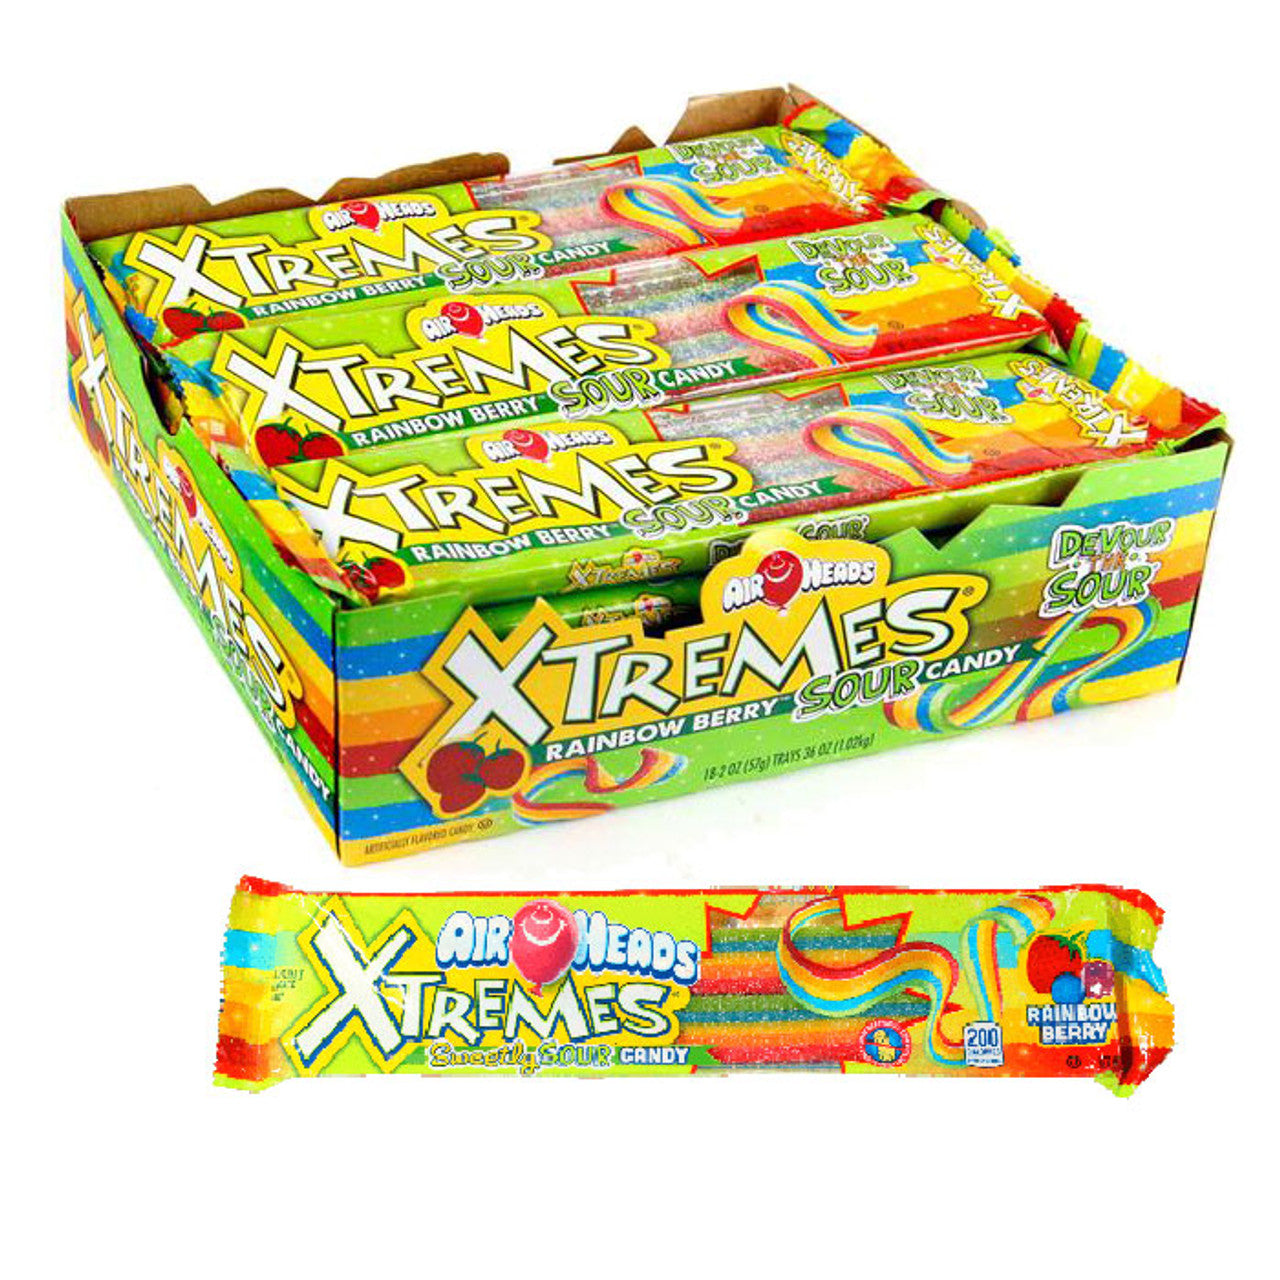 Airheads Xtremes Rainbow Berry Sour Candy Belts 2oz - 18ct